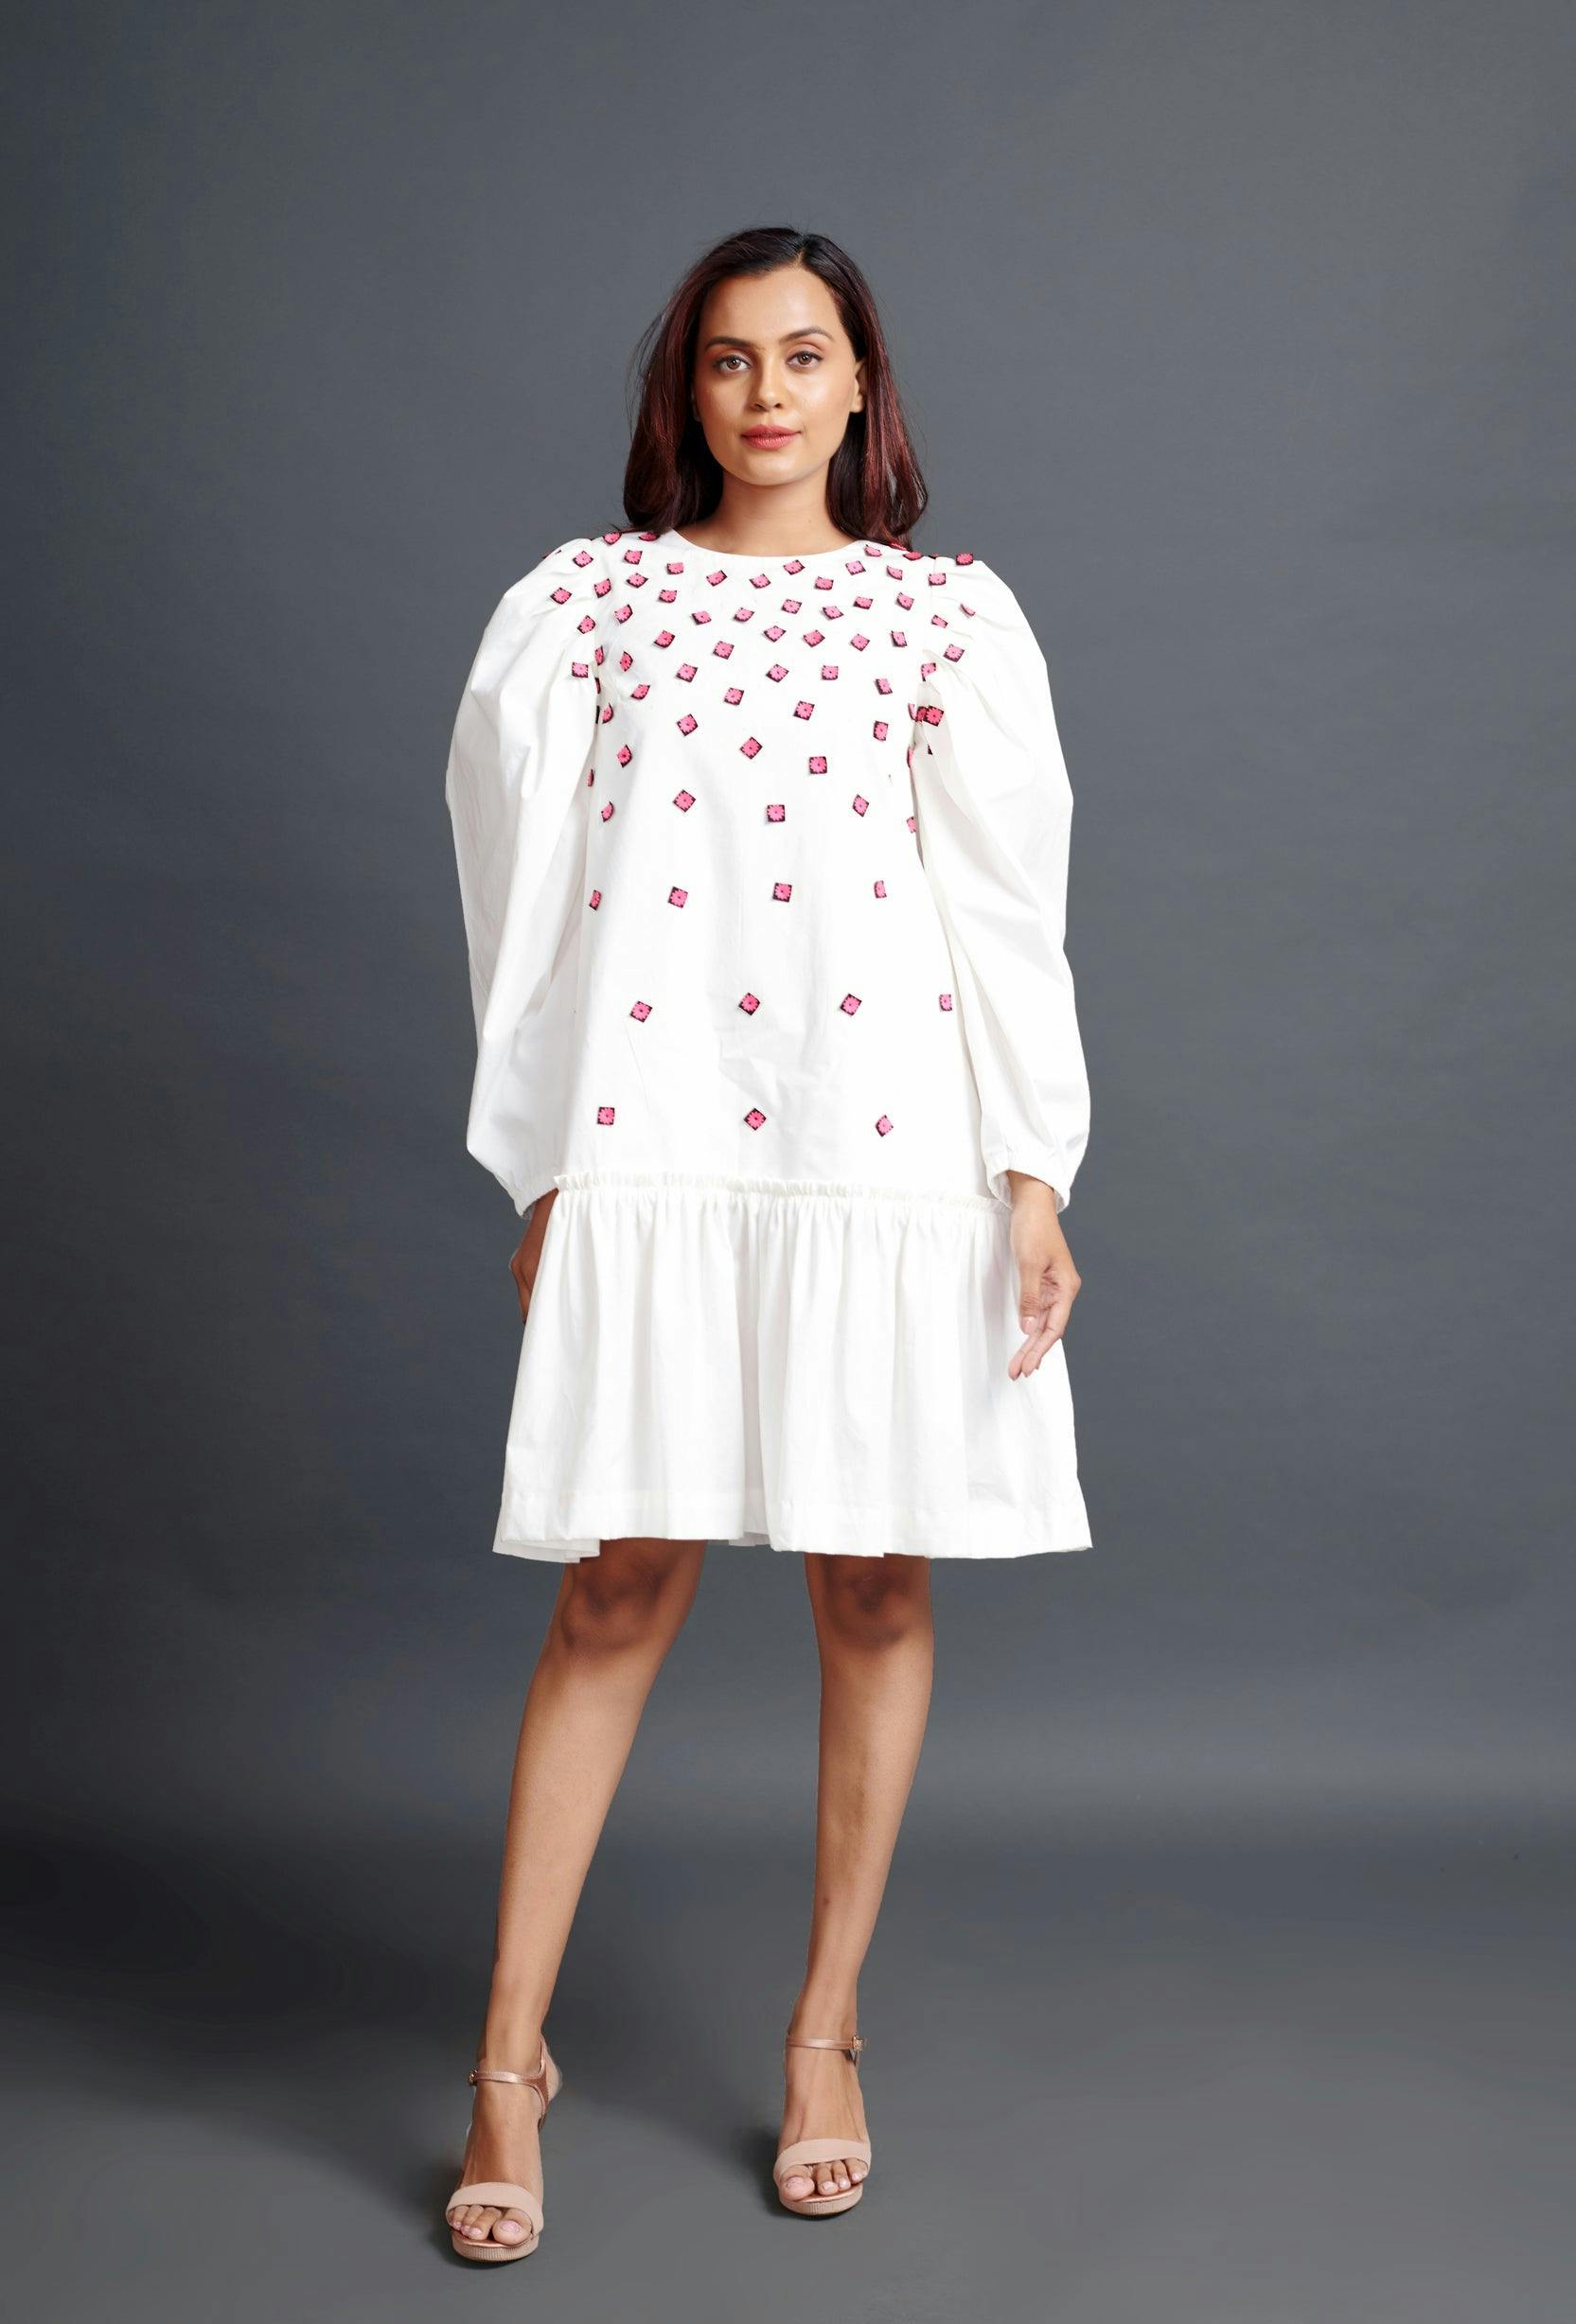 WF-1102-WHITE ::: White Short Backless Dress With Embroidery, a product by Deepika Arora